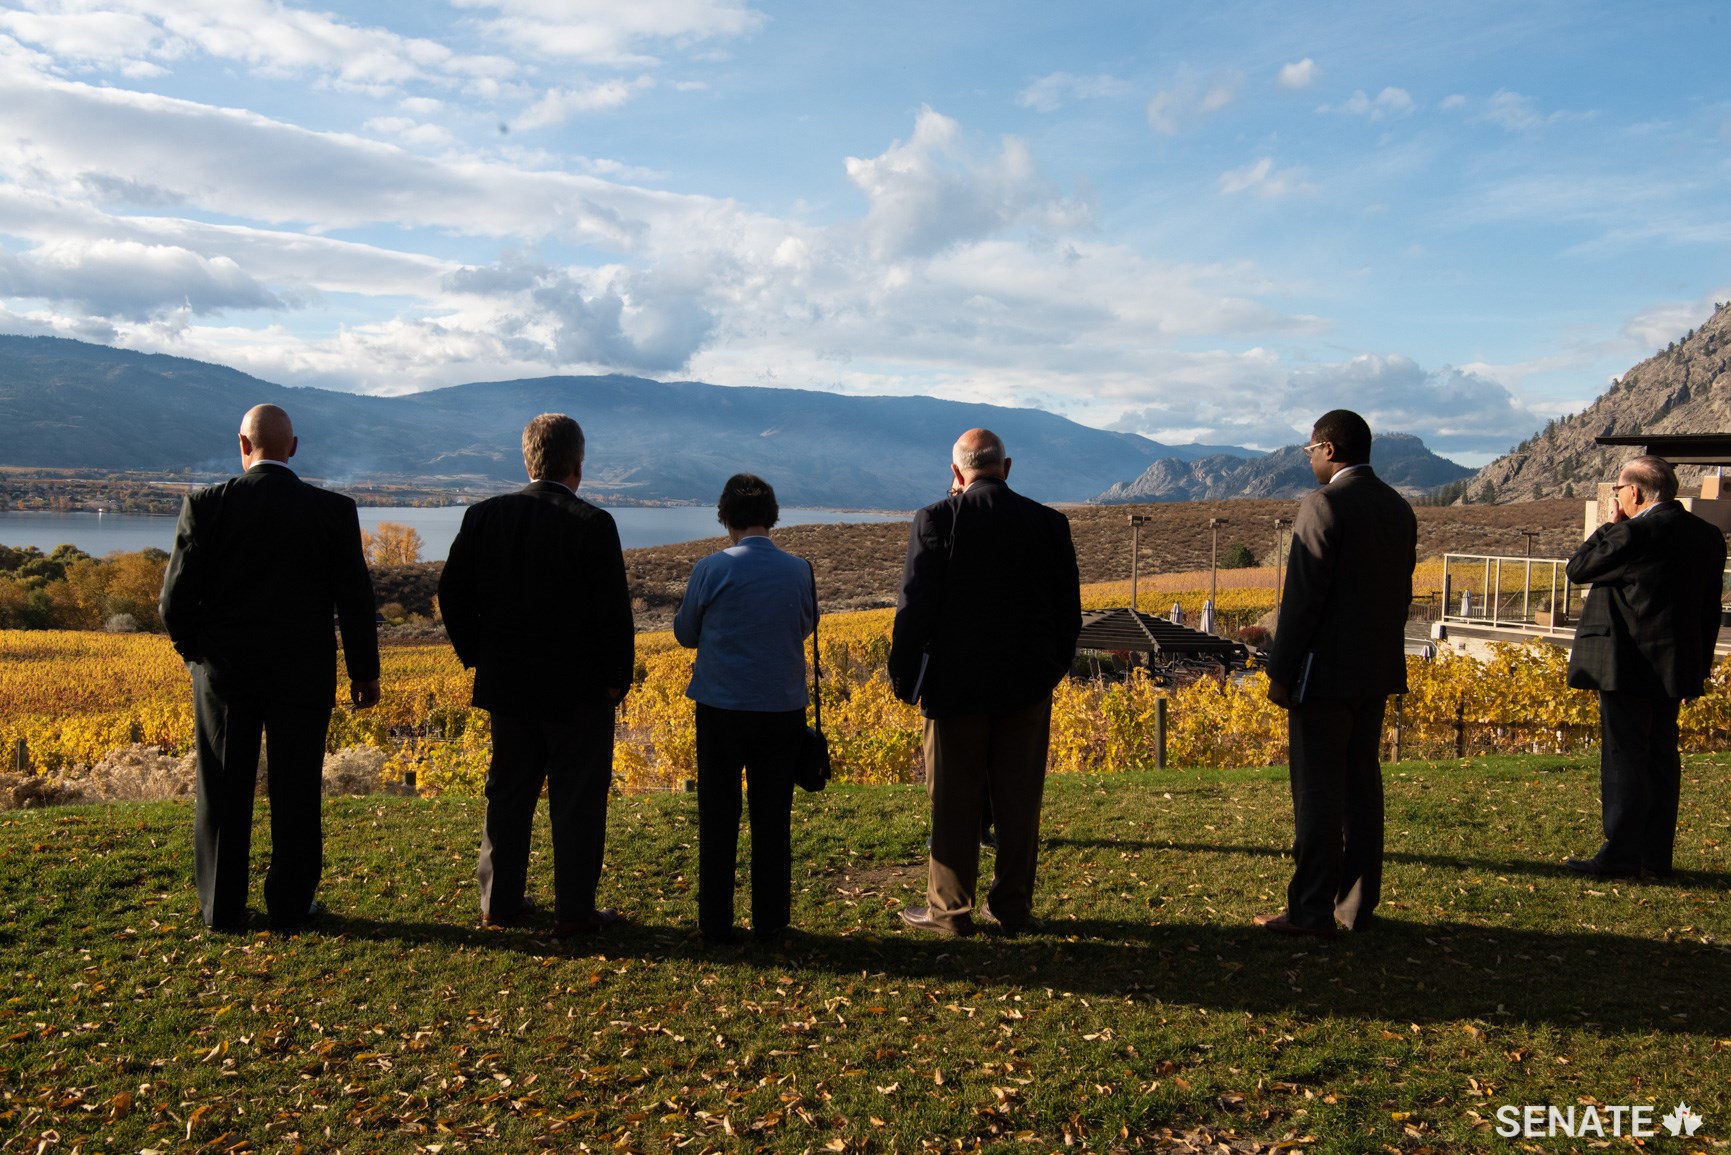 Members of the Agriculture committee admire the view from Nk’Mip Cellars, the first Indigenous-owned winery in North America. Despite winning many national and international awards, they are still unable to sell their products in several of Canada’s provinces or in any of the territories.